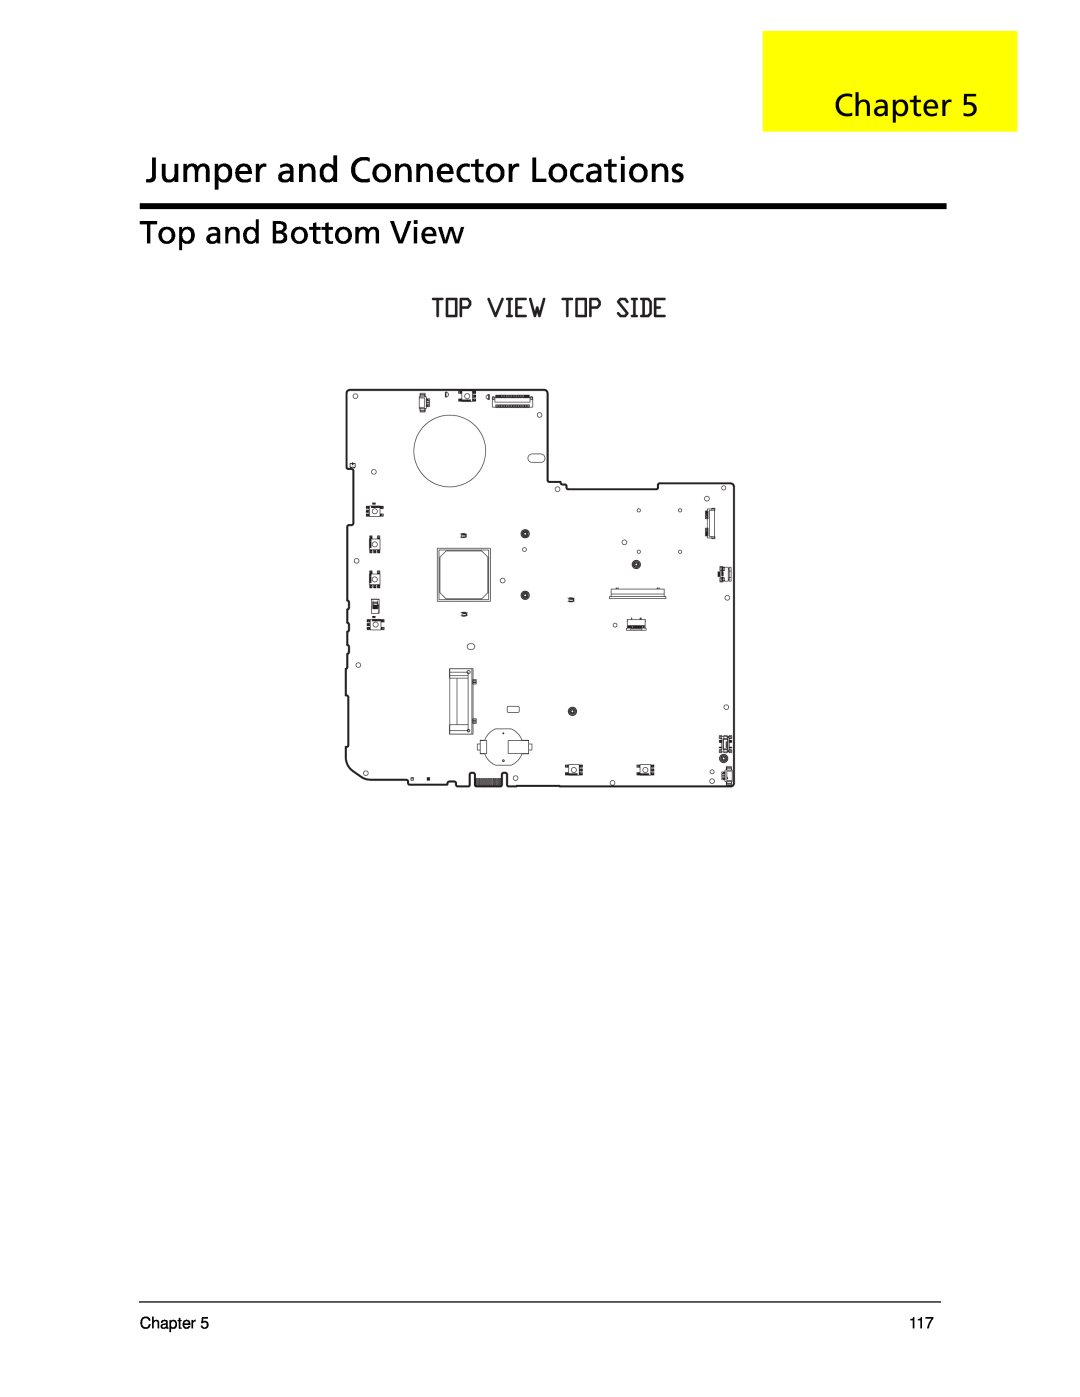 Acer 5330 manual Jumper and Connector Locations, Top and Bottom View, Chapter 